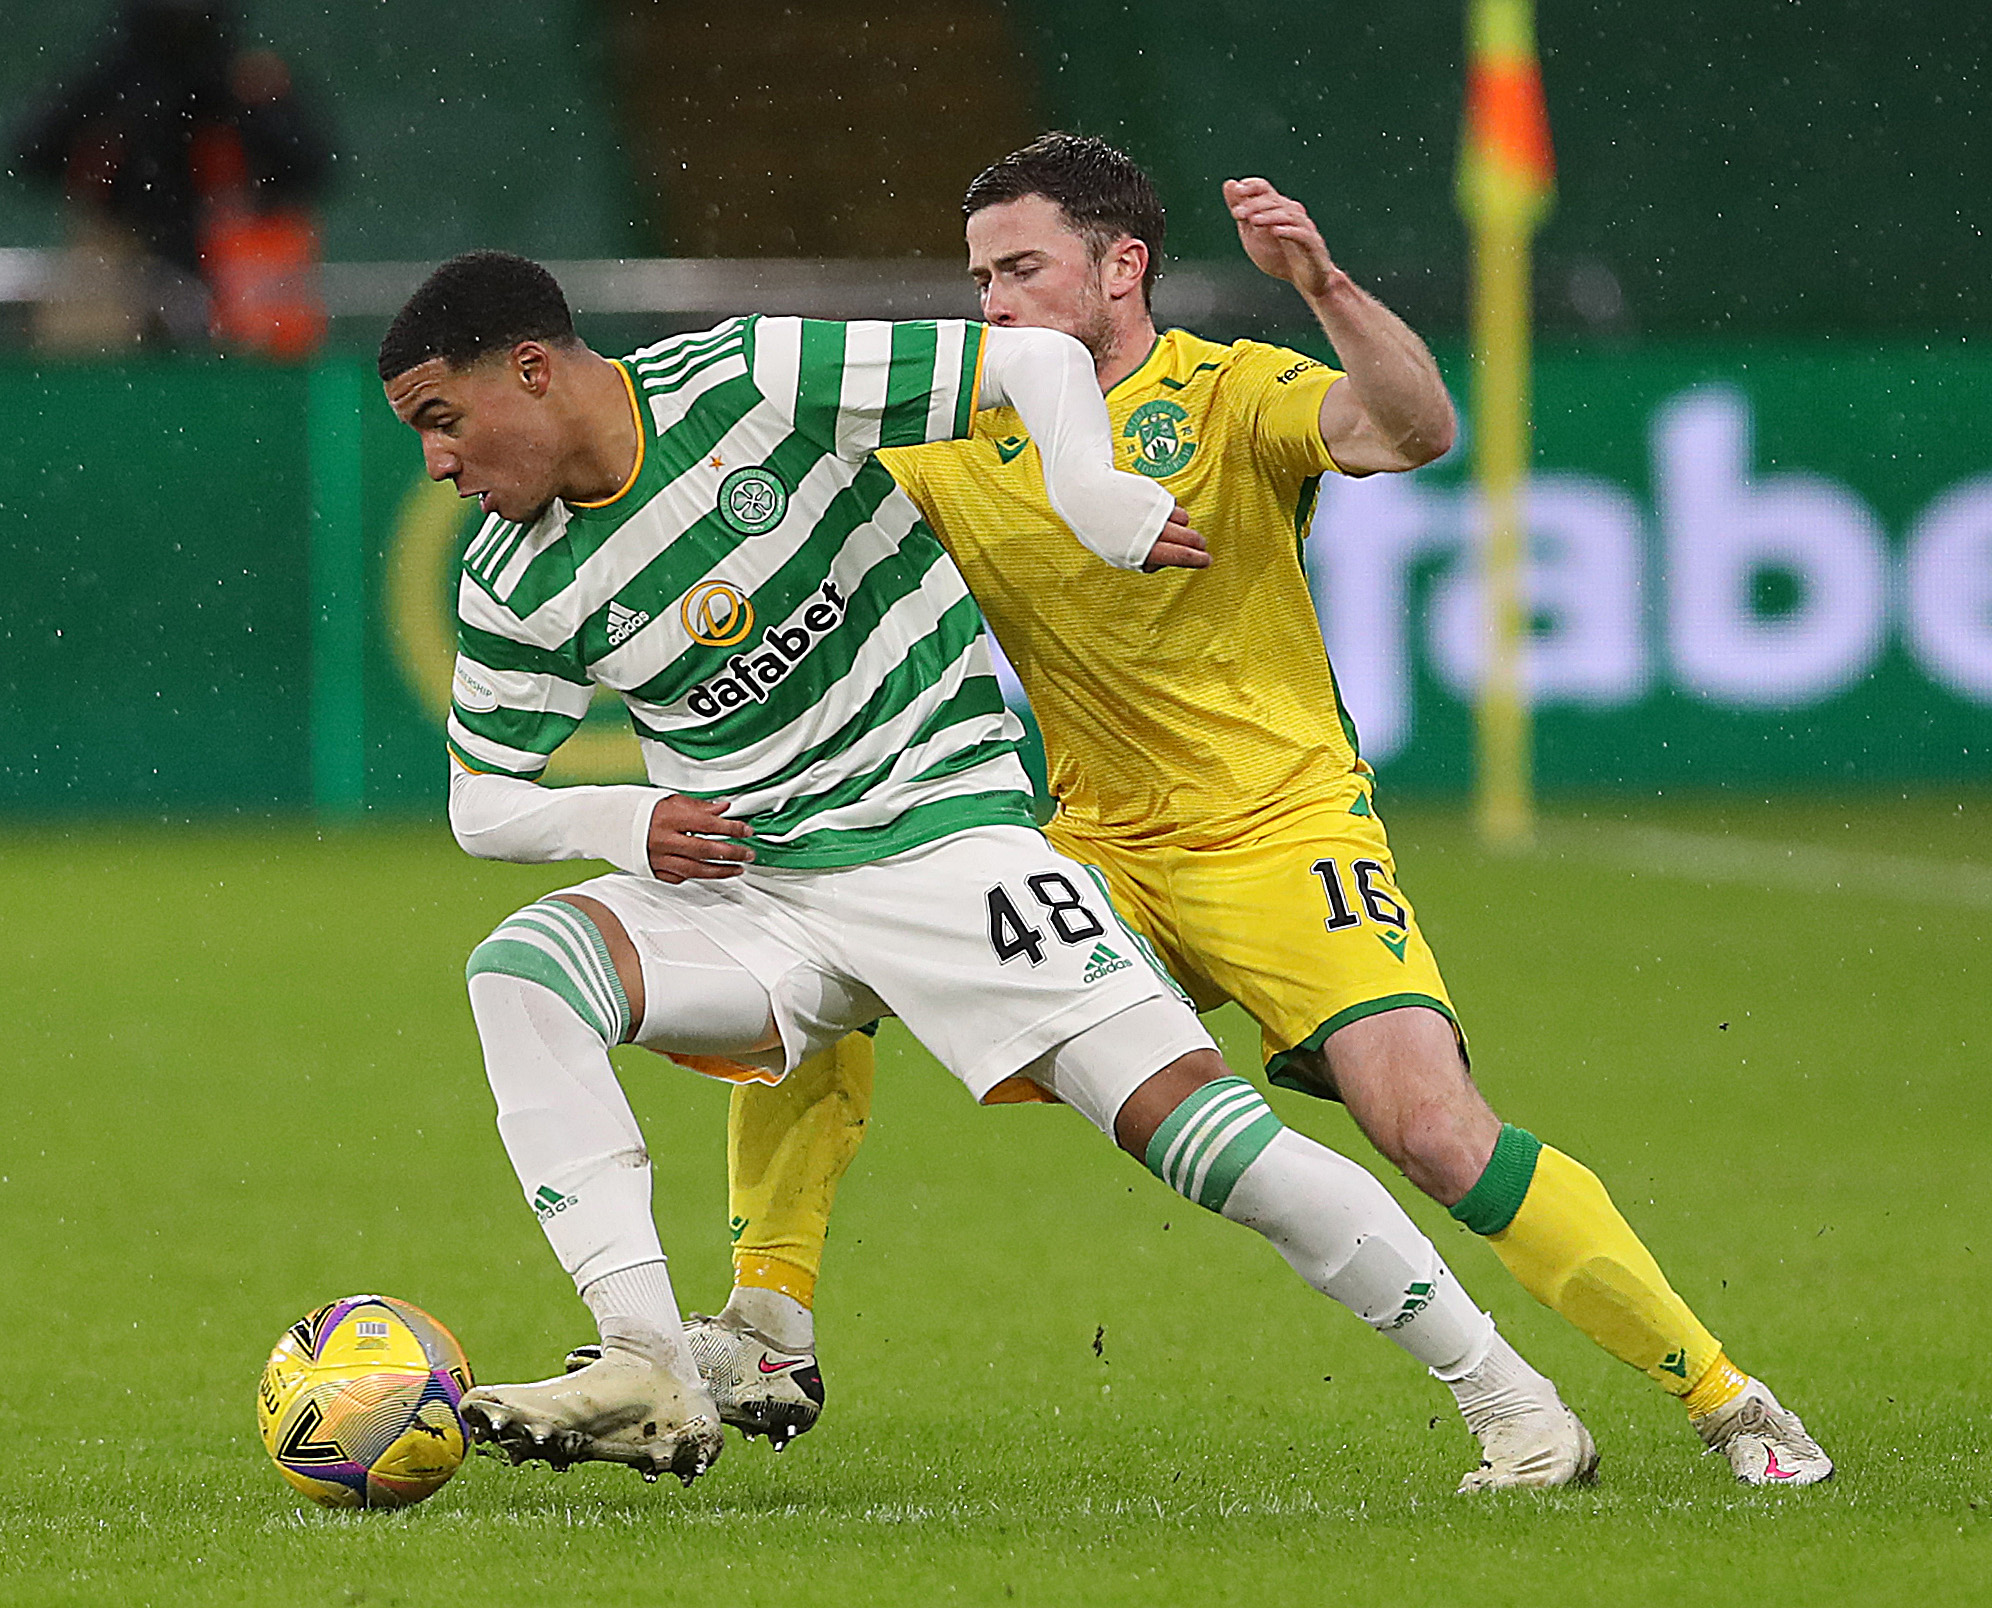 Mystery over 2021 Celtic debutant Armstrong Okoflex